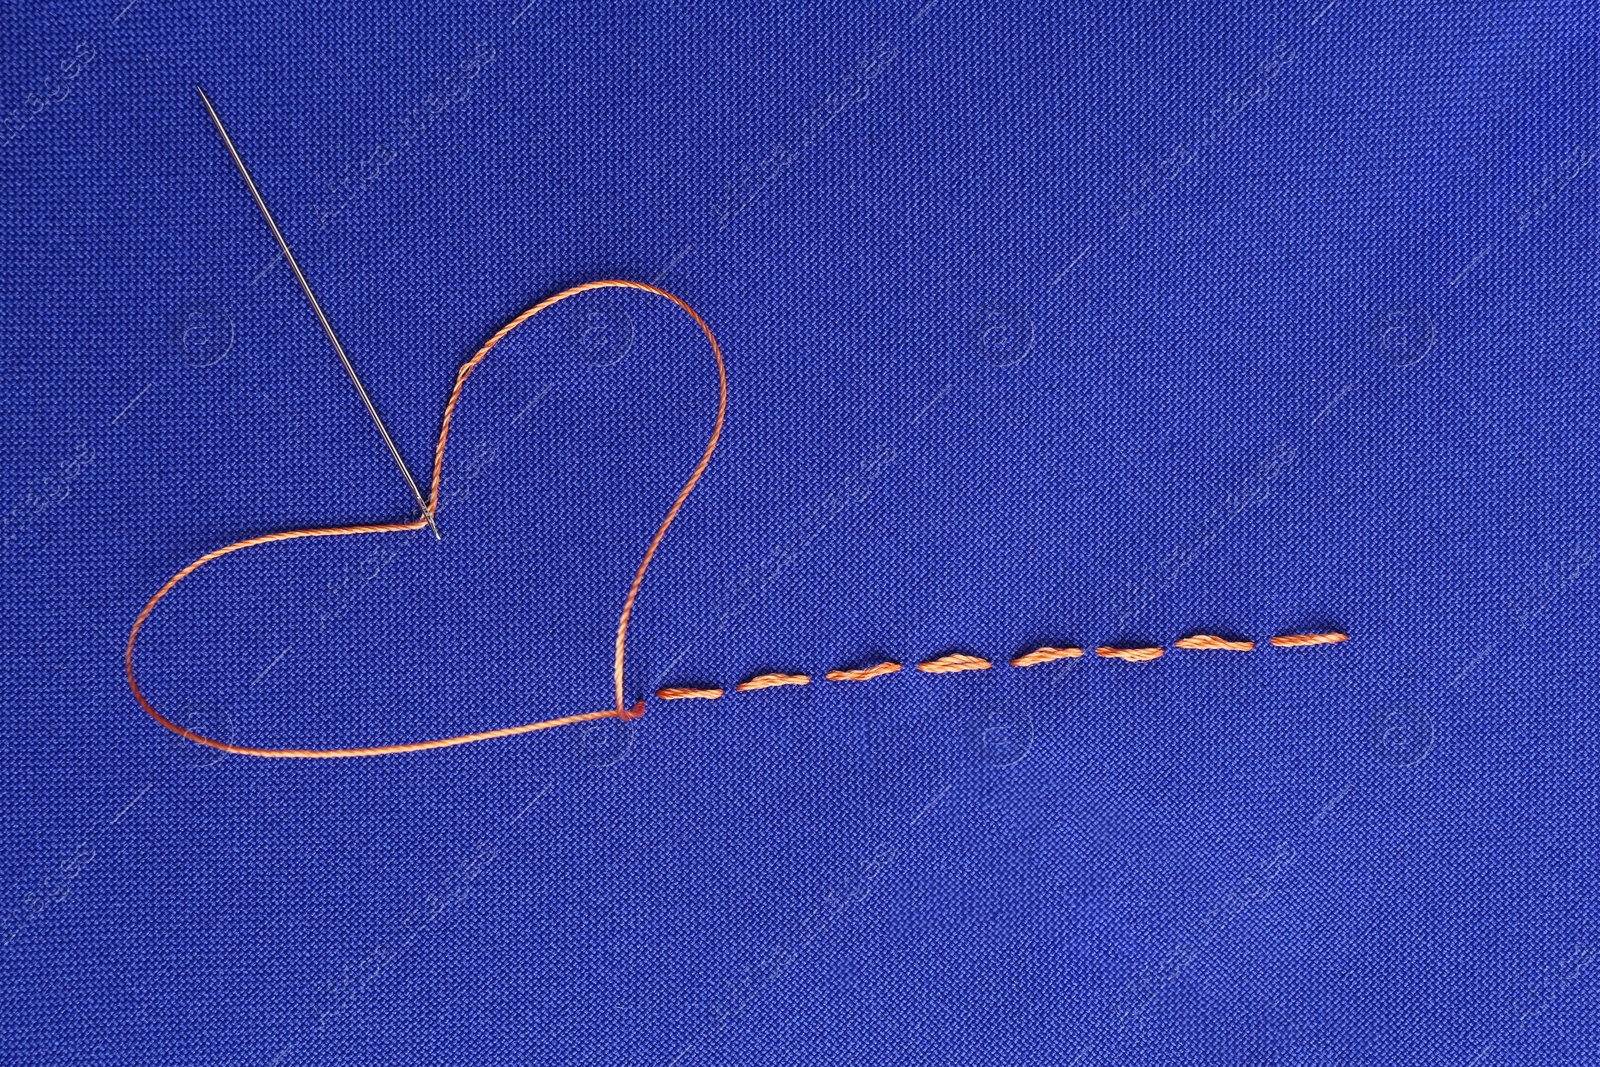 Photo of Sewing needle with thread and stitches on blue cloth, top view